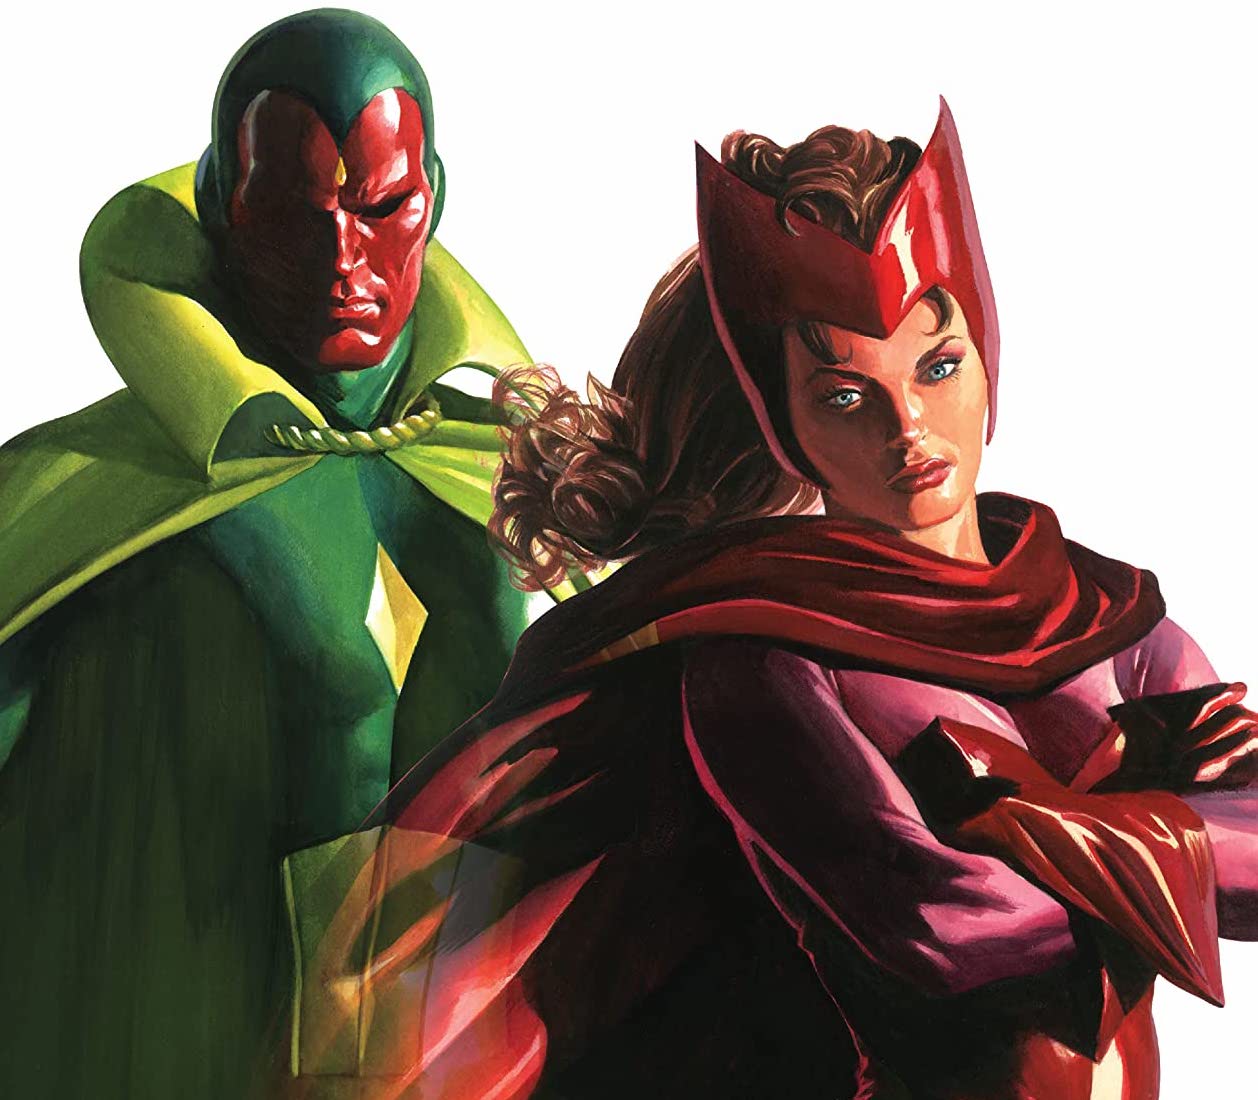 Vision and the Scarlet Witch: The Saga of Wanda and Vision